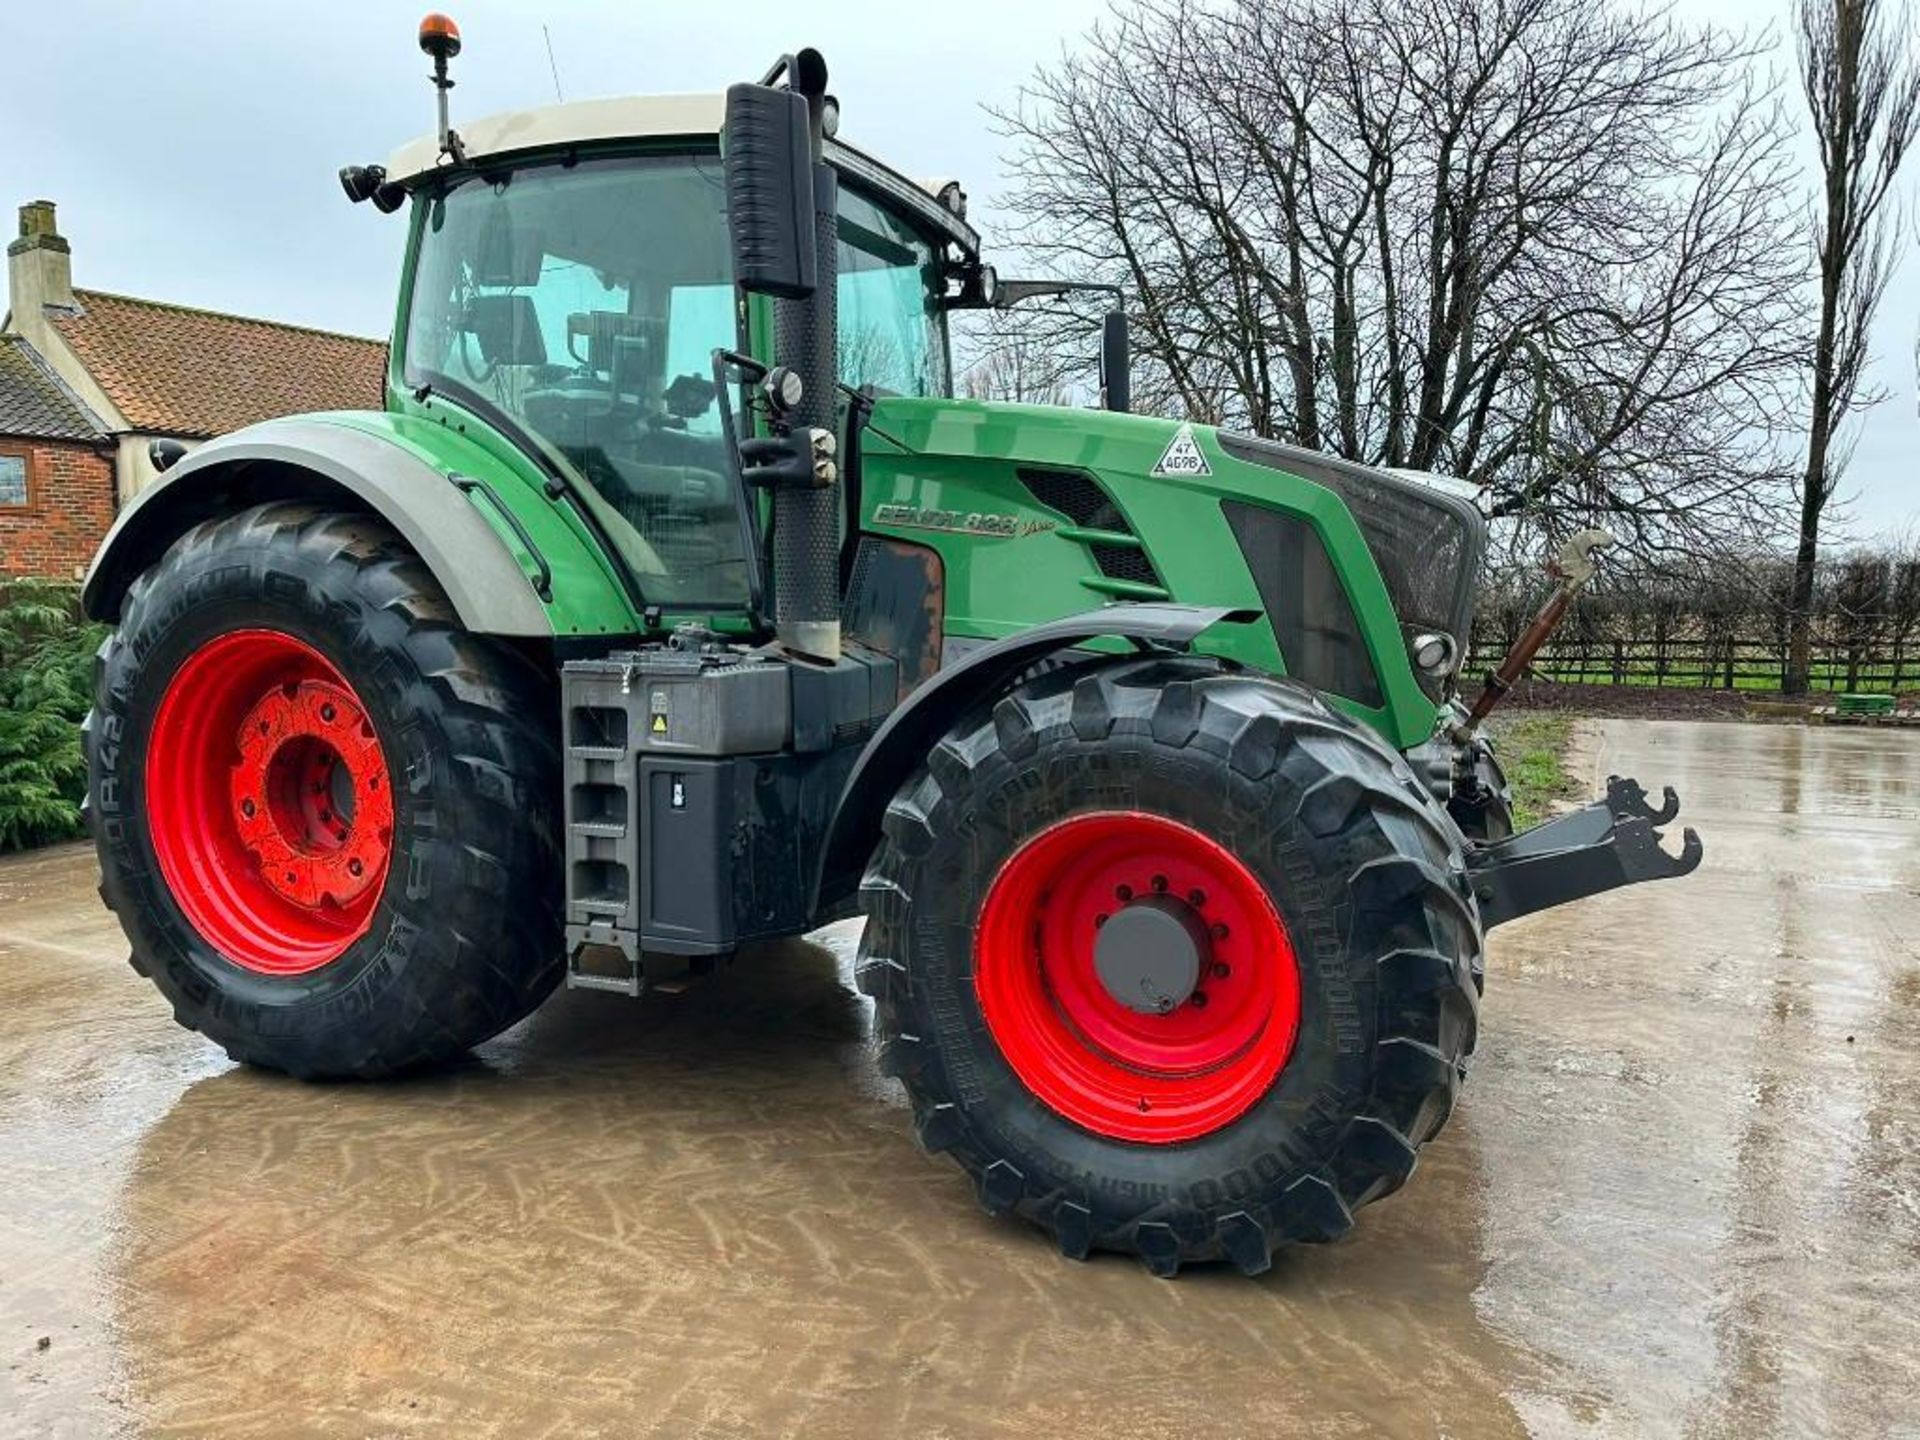 2013 Fendt 828 Vario tractor, 4wd, front linkage, front spool valves, 4No rear spool valves, Bill Be - Image 14 of 23